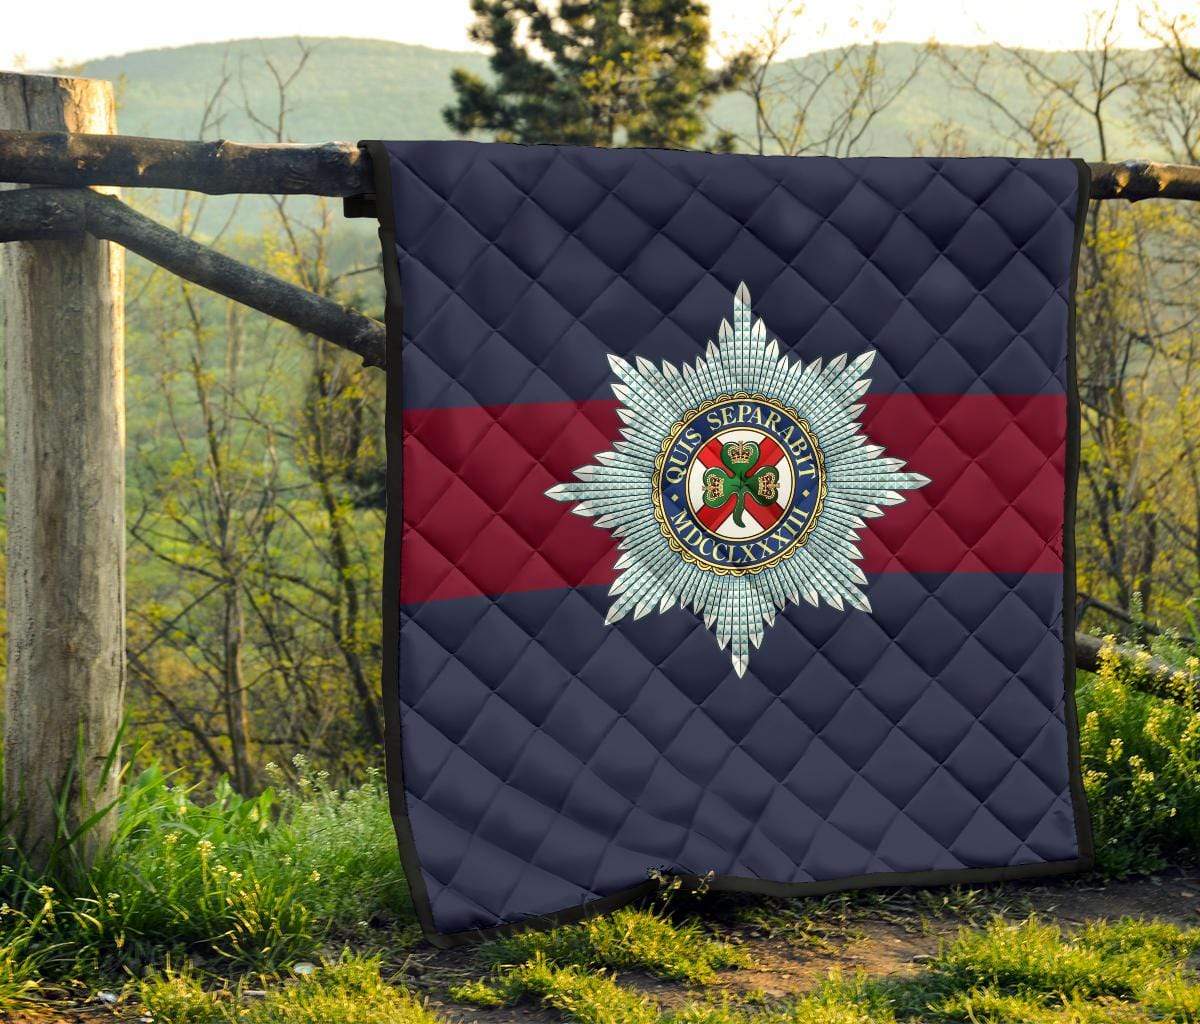 quilt Lap Blanket (45 x 50 inches / 114 x 127 cm) Irish Guards Quilted Blanket